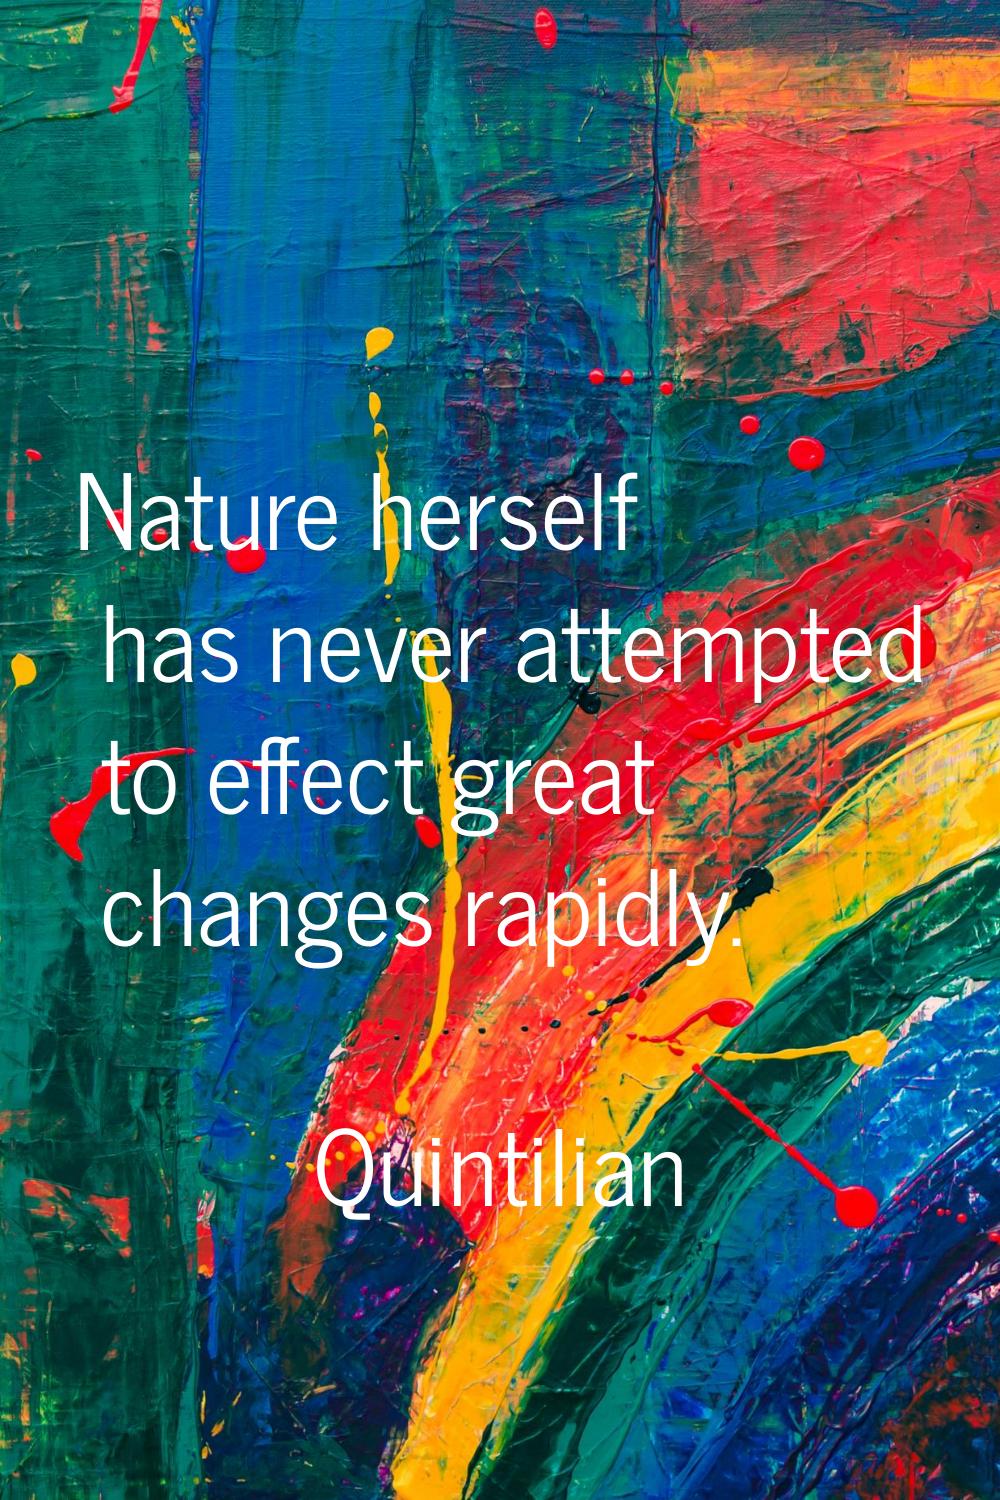 Nature herself has never attempted to effect great changes rapidly.